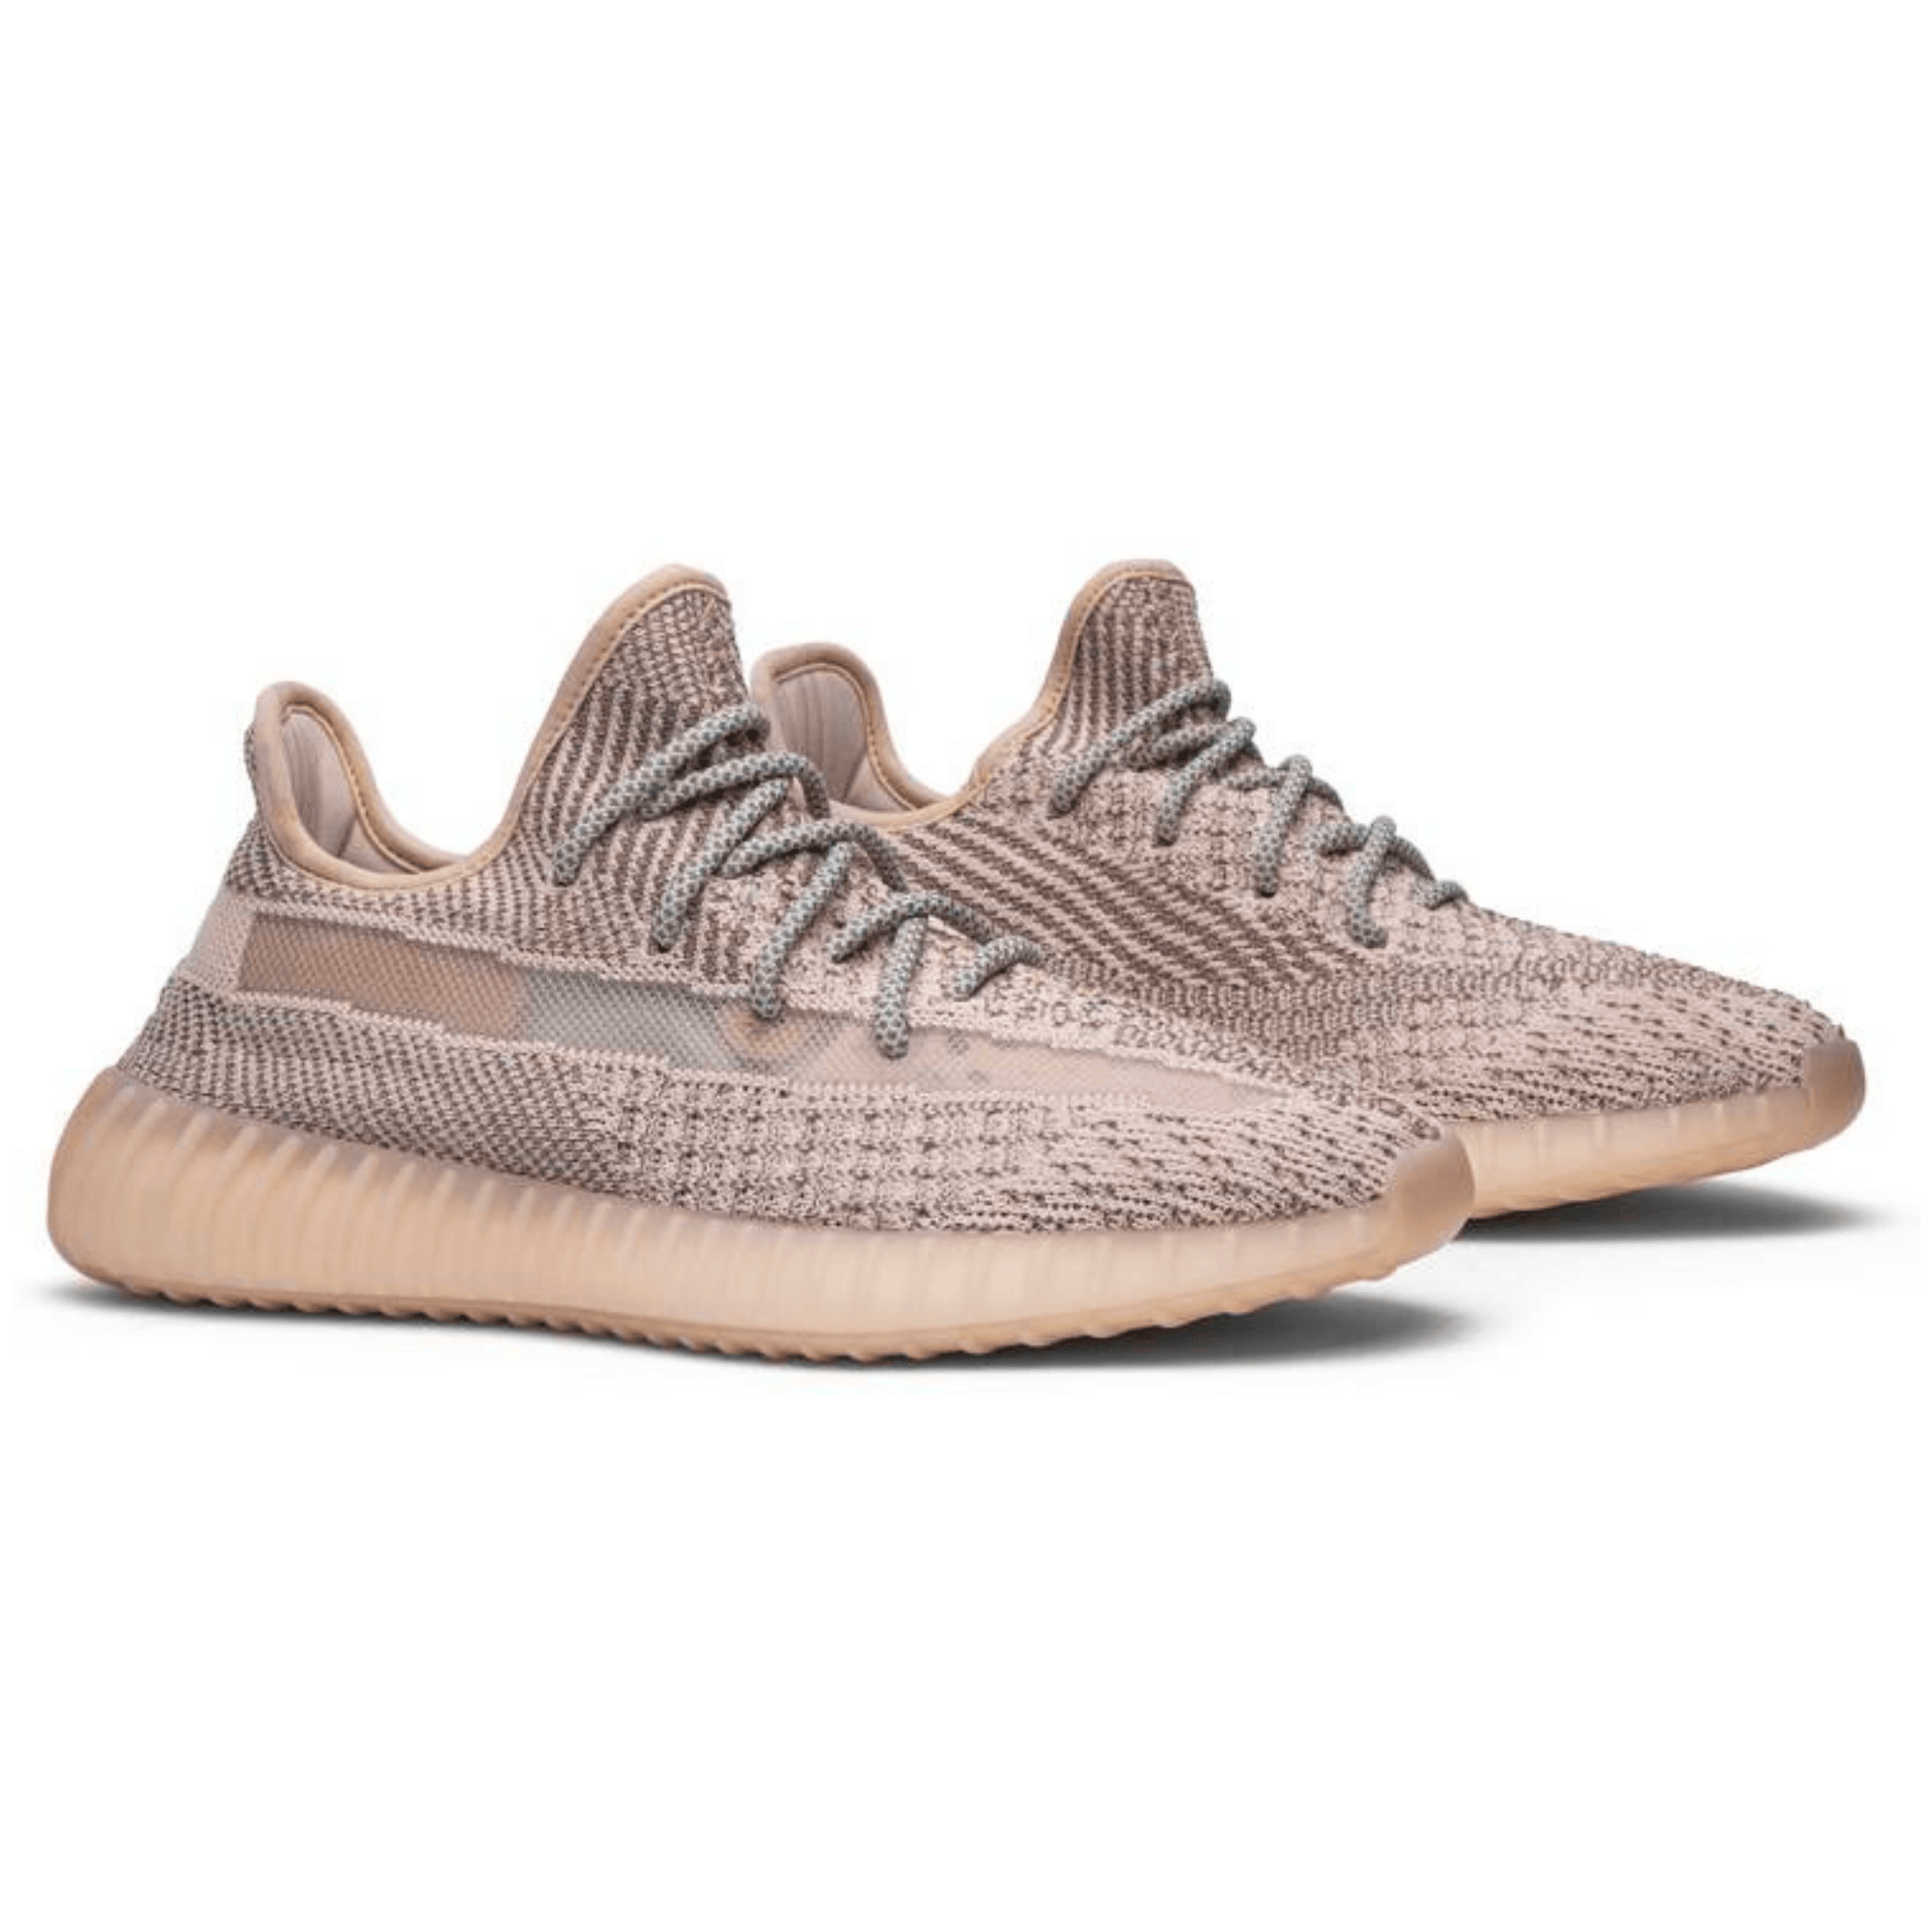 Yeezy Boost 350 V2 'Synth' (Reflective) - FRESNEAKERS